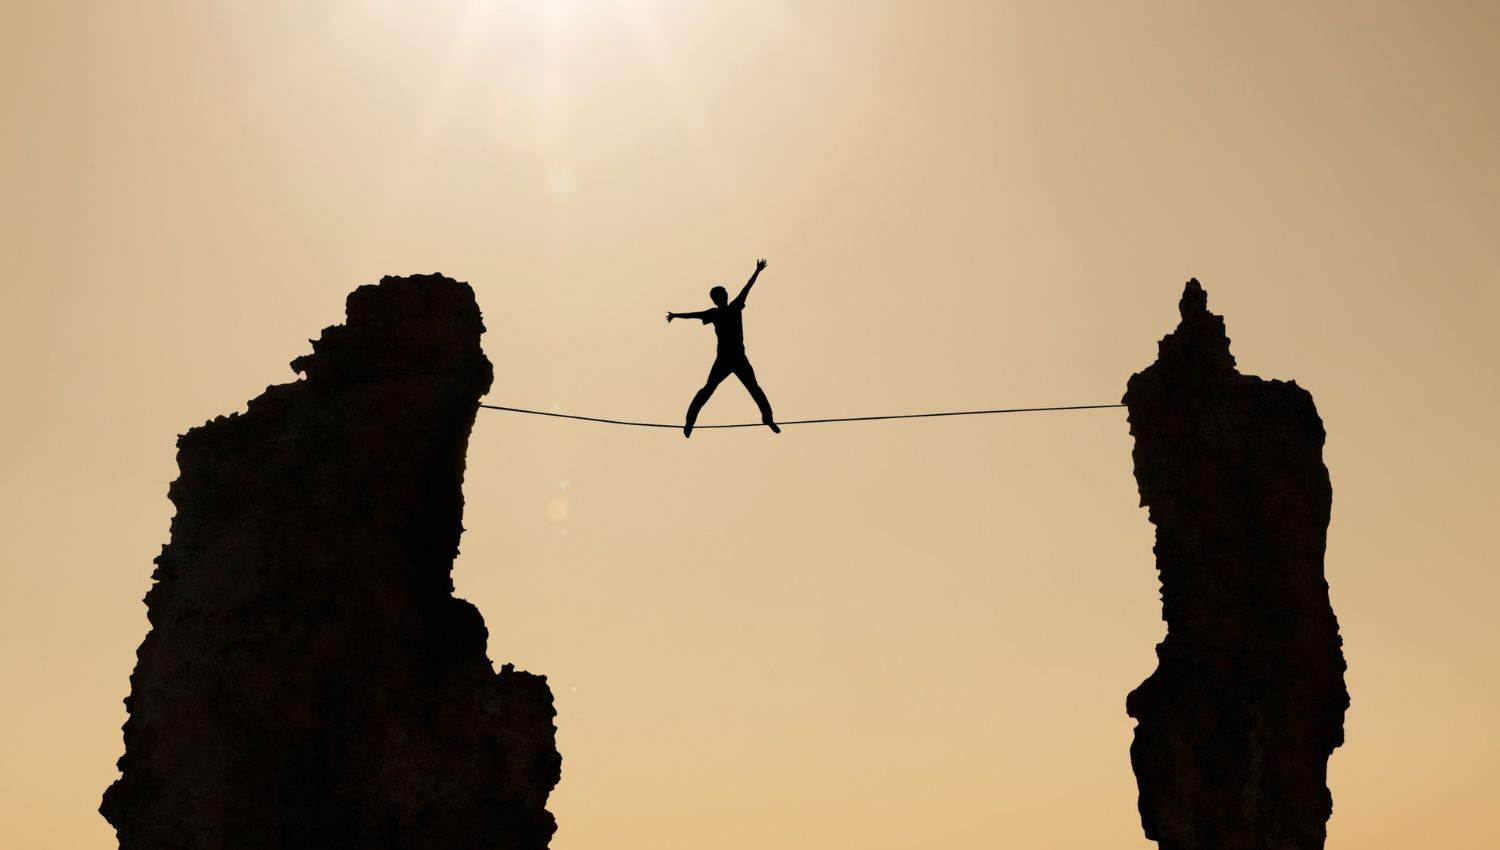 A man walks across a tight rope suspended between two tall rock formations